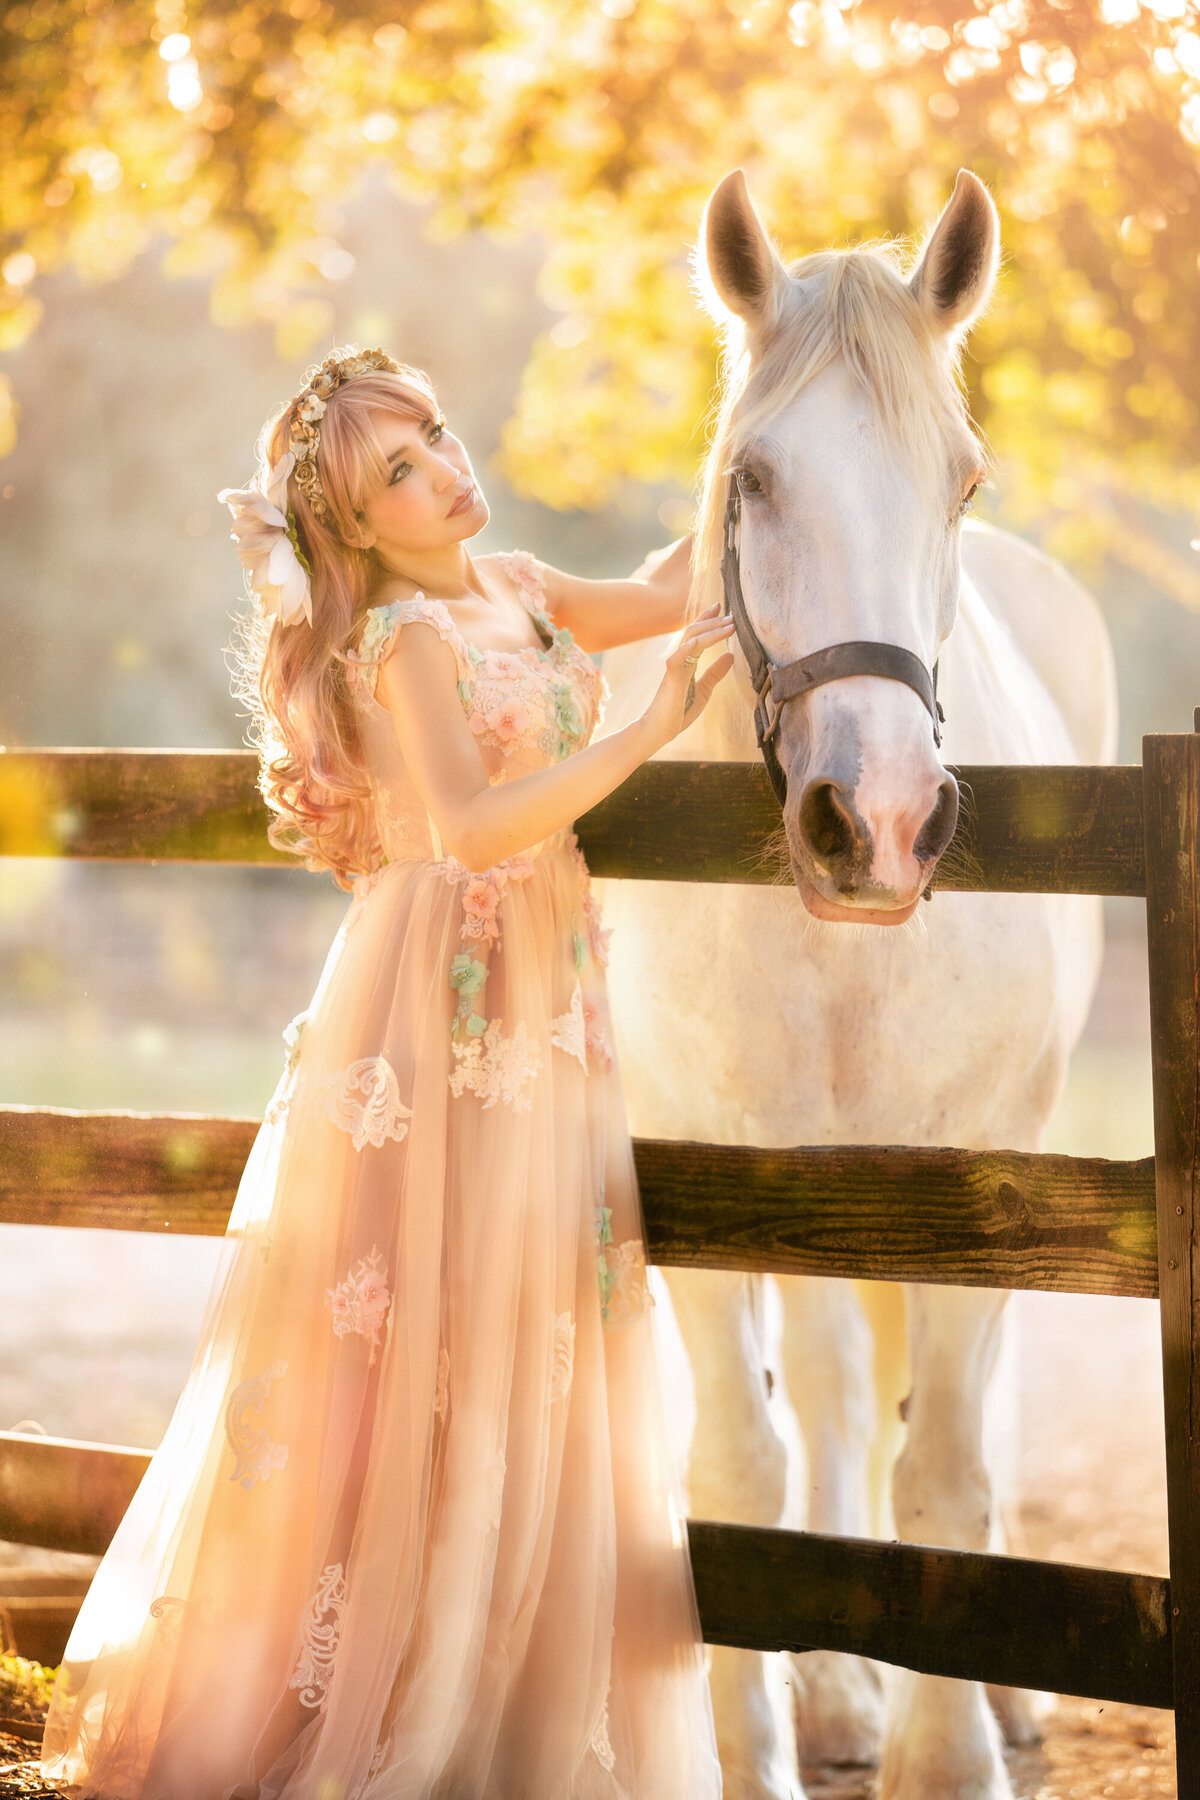 Asian woman with long blonde hair wearing a nude colored gown from Chotronette.  She is standing with a white Shire horse and petting her.  The horse is on the other side of a wooden fence.  There are golden leaves on the trees in the background and lots of sunlight.